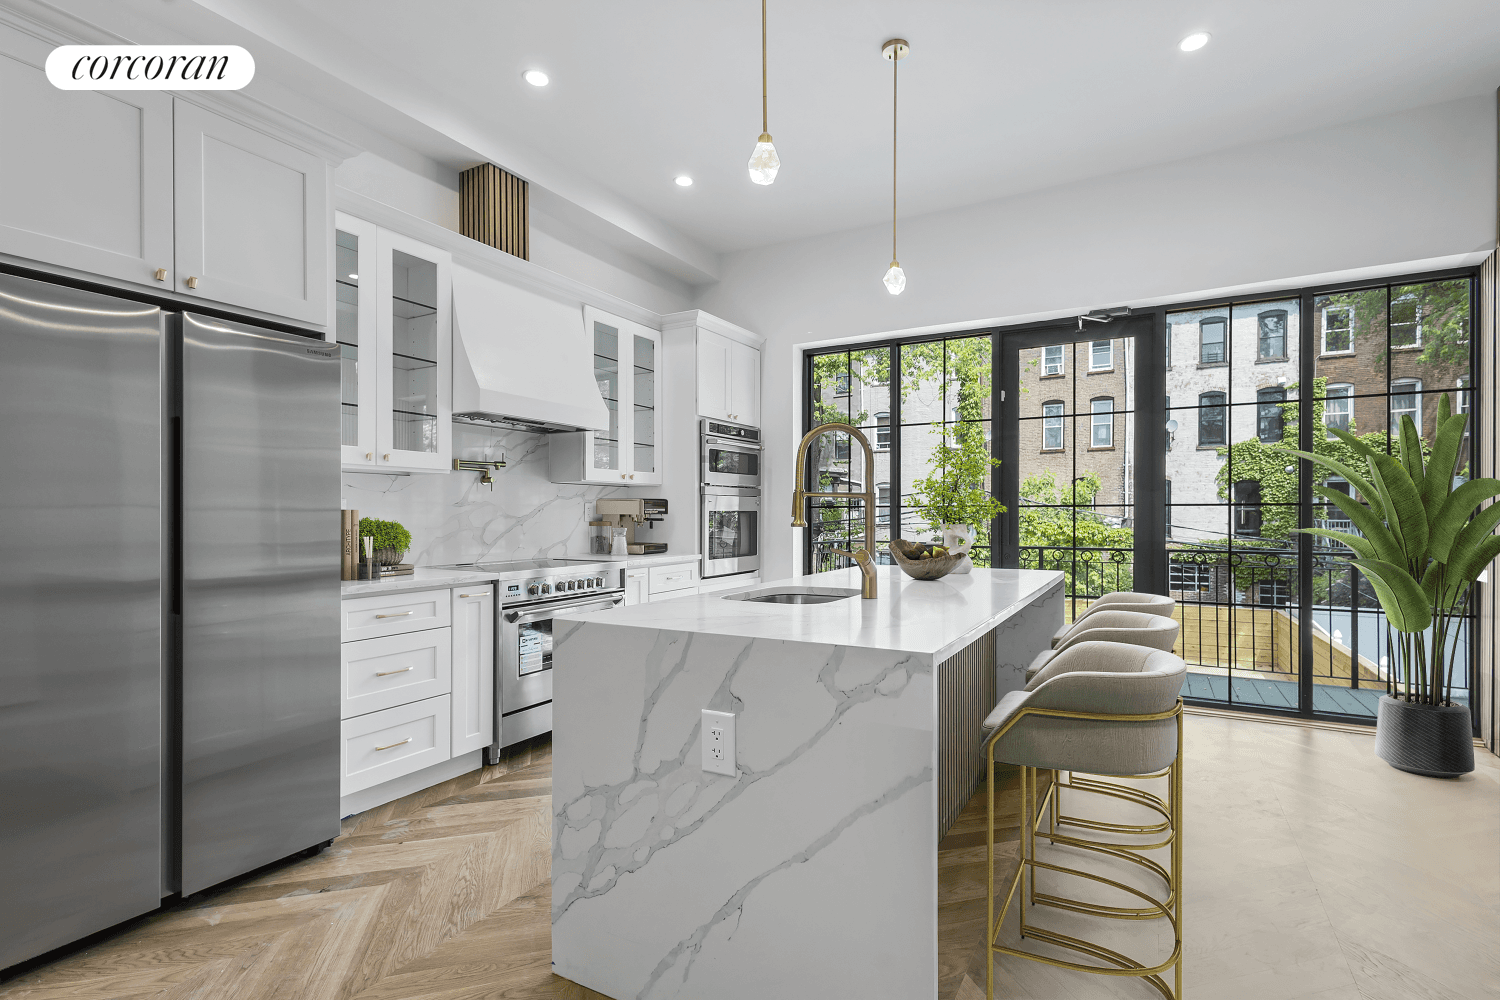 Enter 667 Jefferson Ave, where the seamless integration of historical charm and modern comfort invites you.